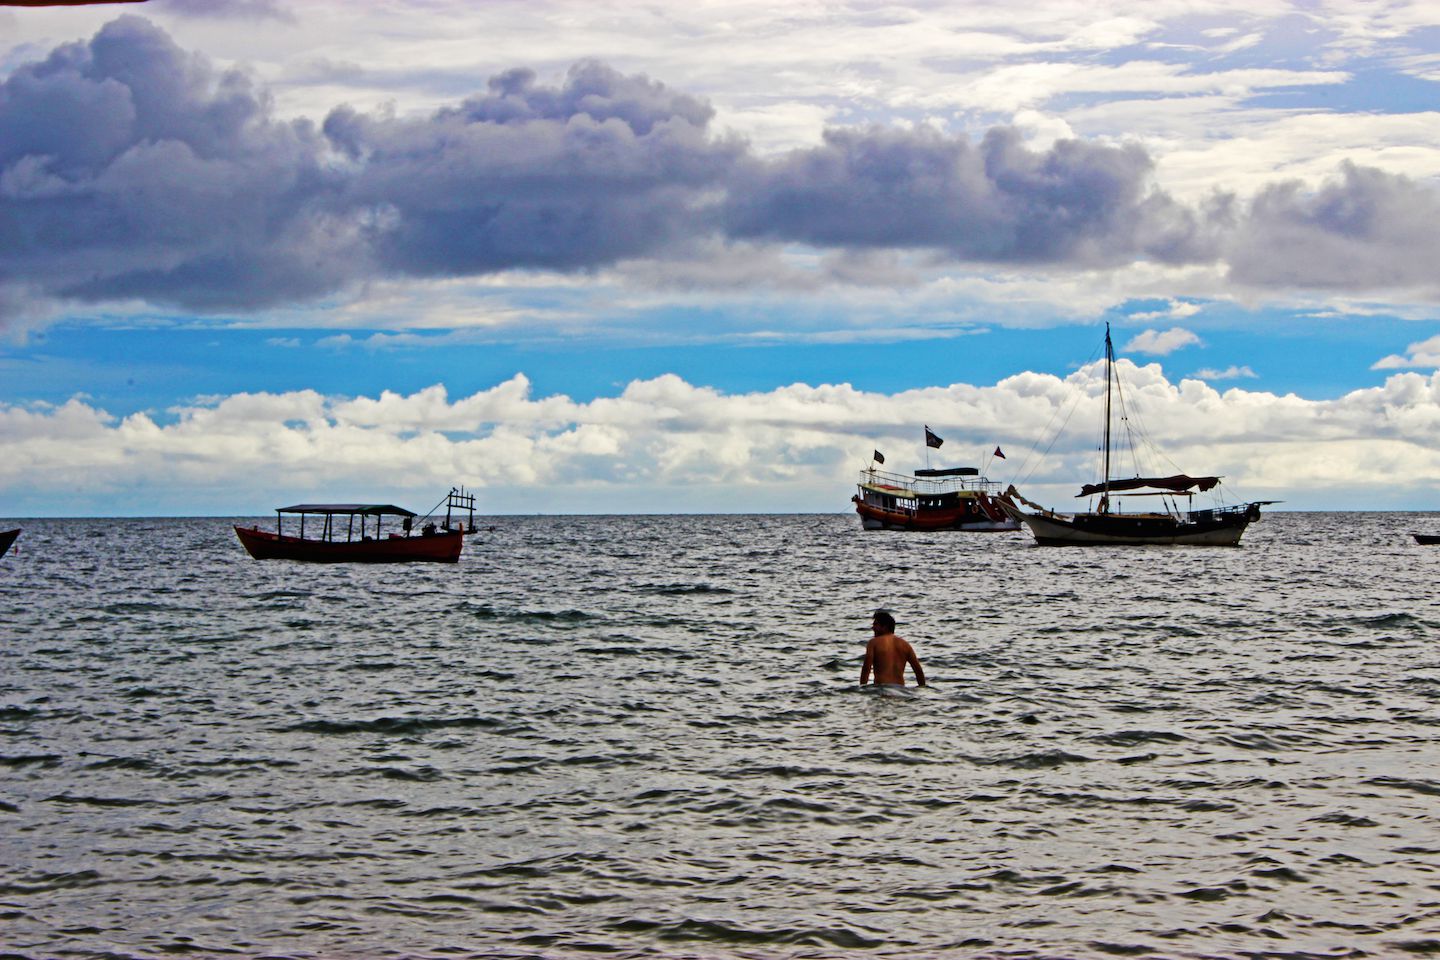 Carlos going for a swim in Sihanoukville